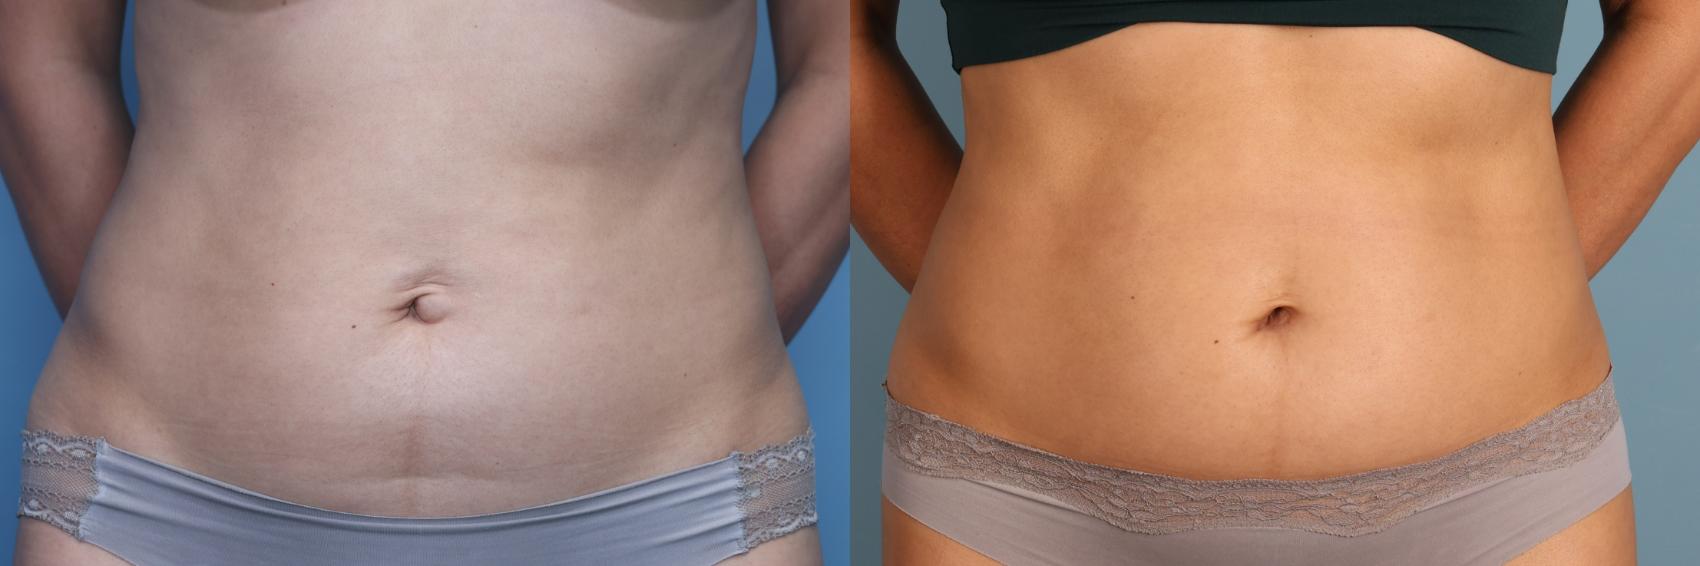 Before & After Tummy Tuck (Abdominoplasty) Case 391 Front View in Portland, OR